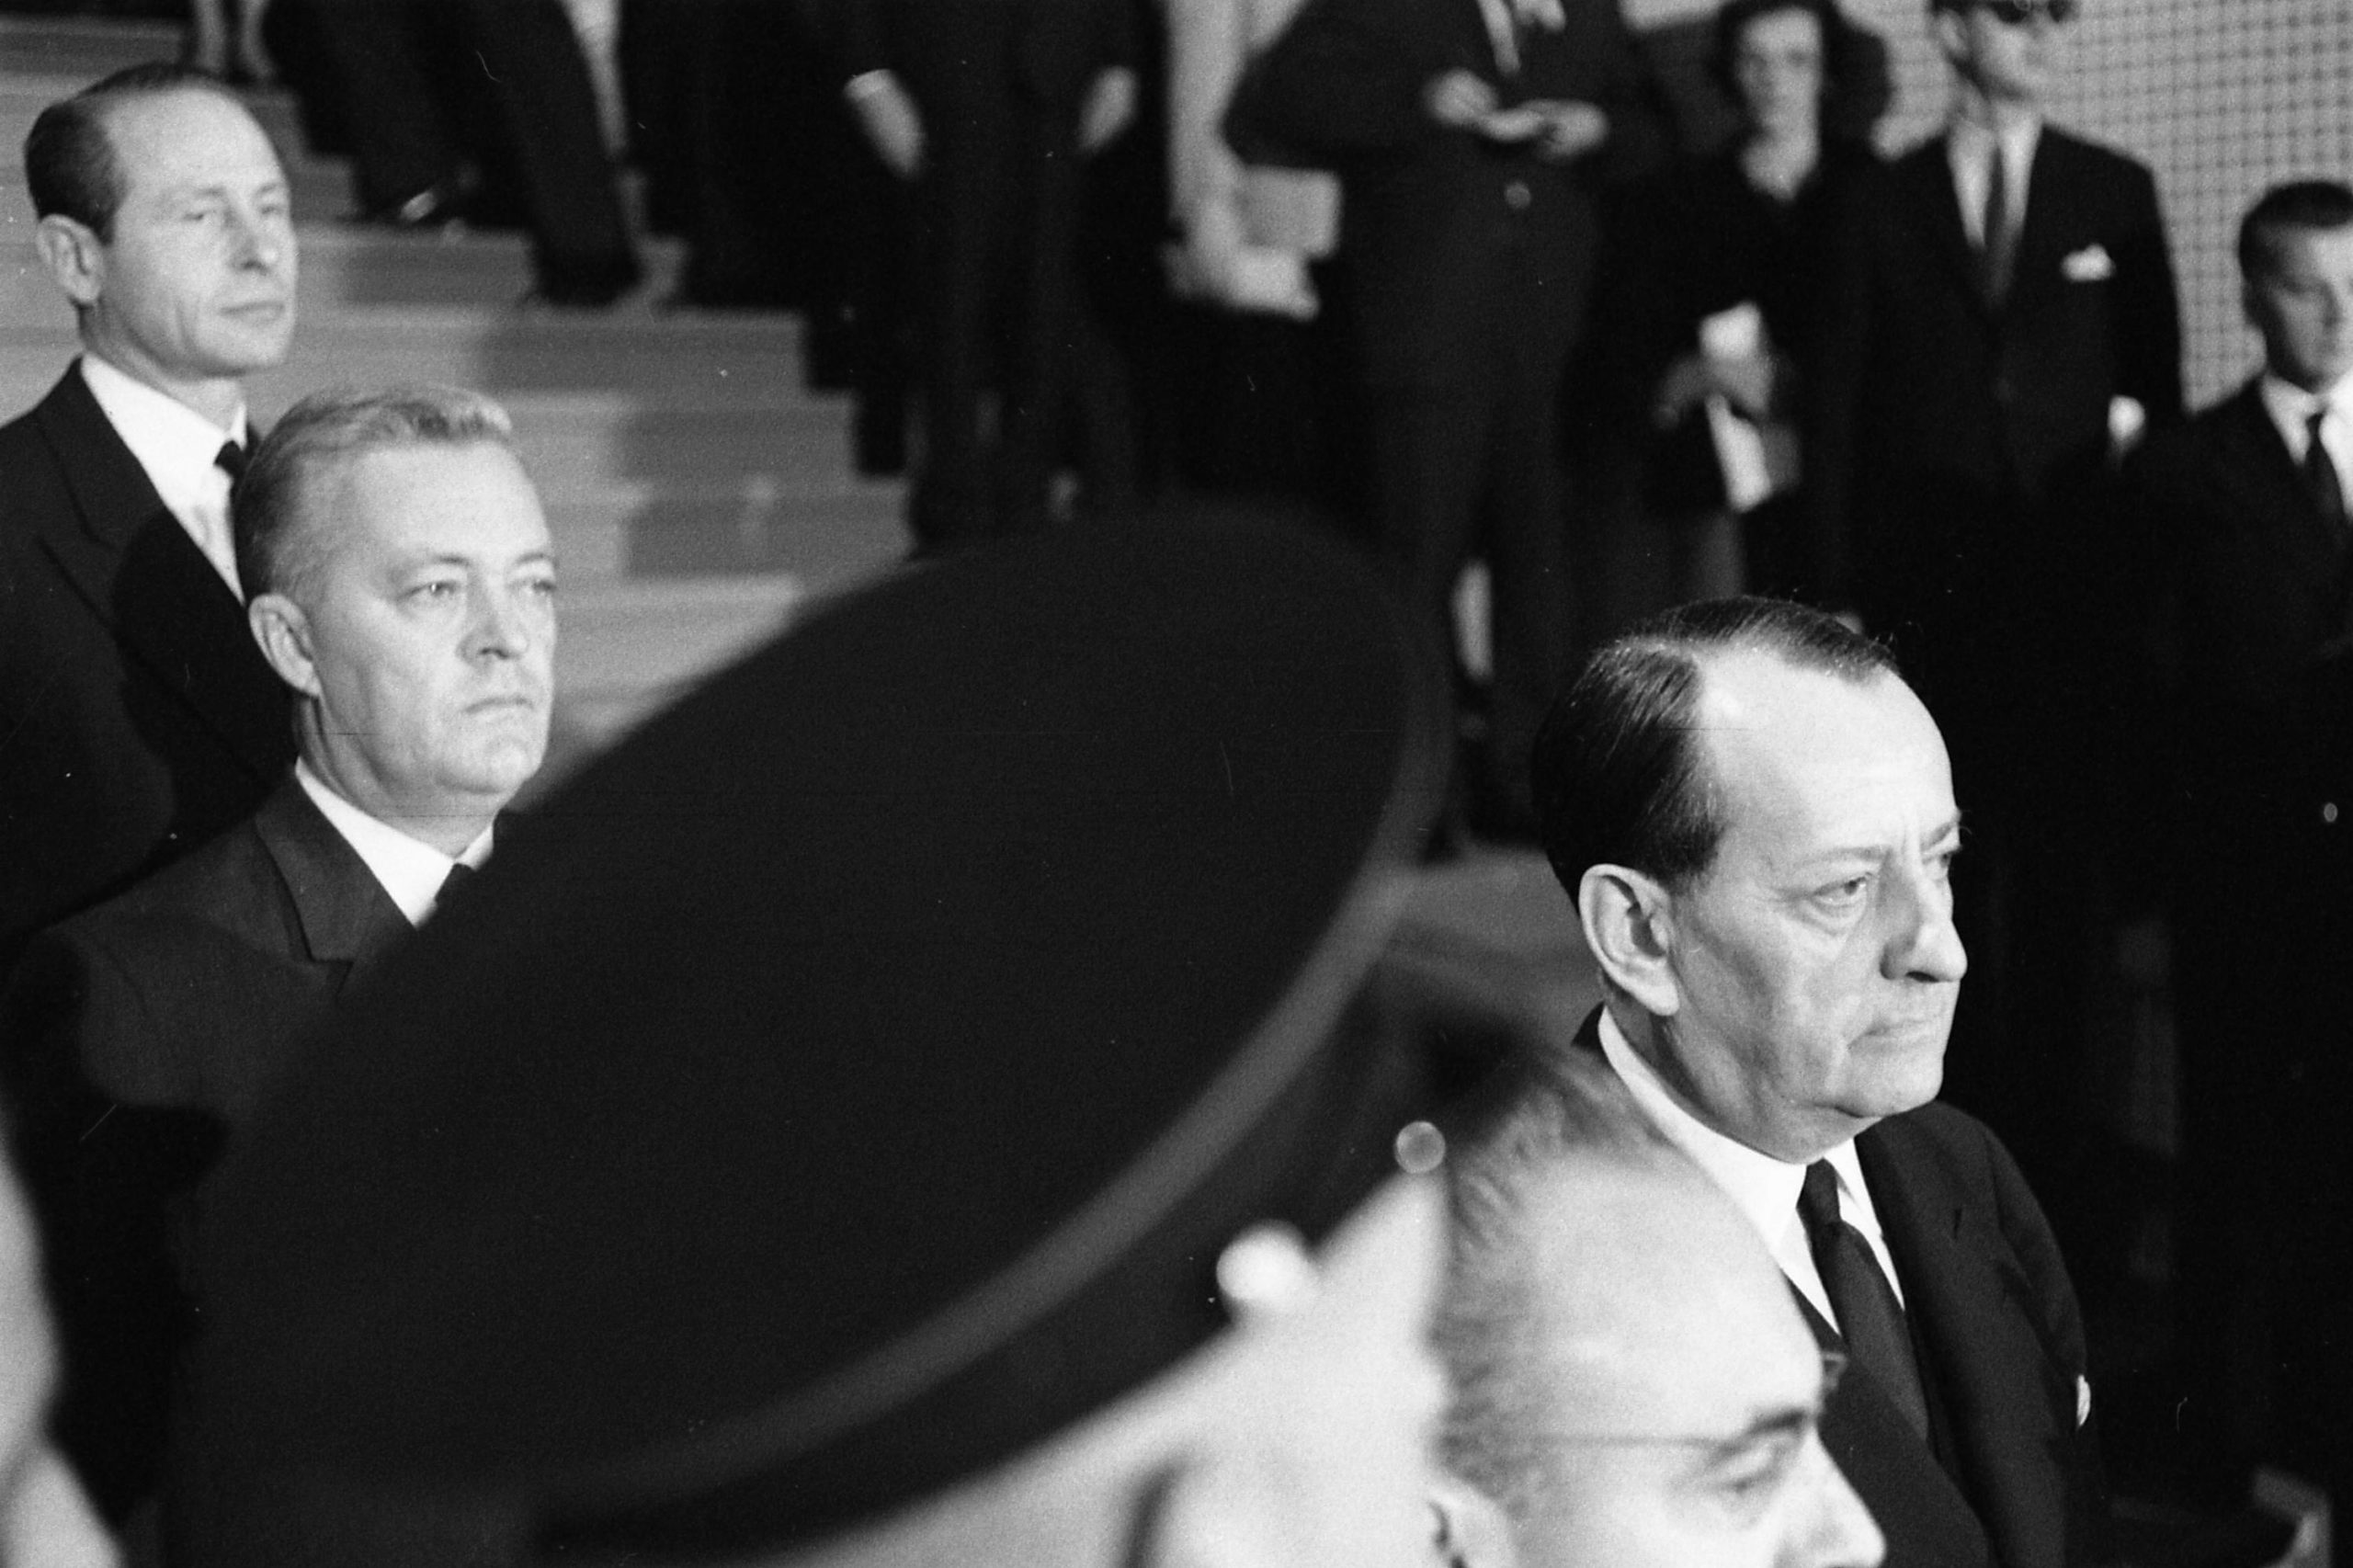 Three men in suits descend a staircase. A military officer's hat obscures most of the shot.